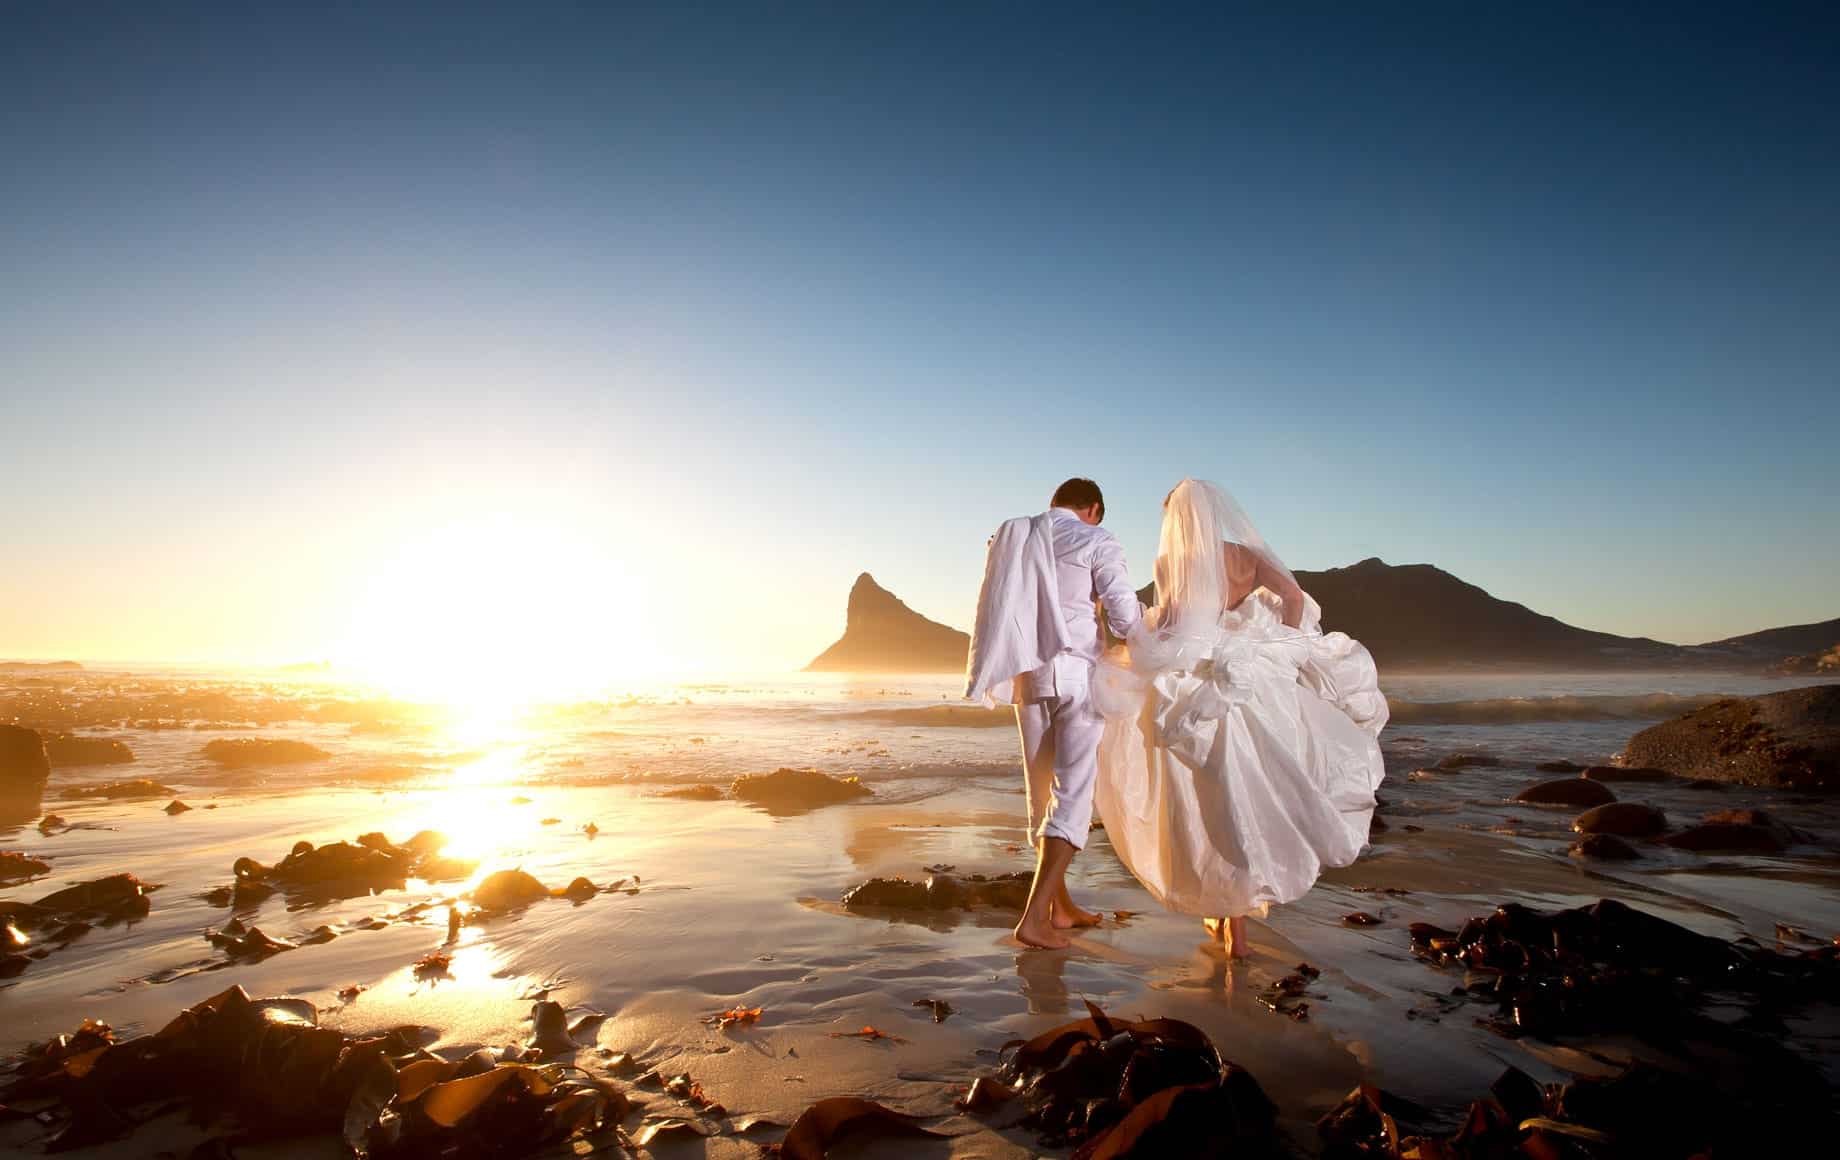 Cape Town is an ideal destination for weddings all year round